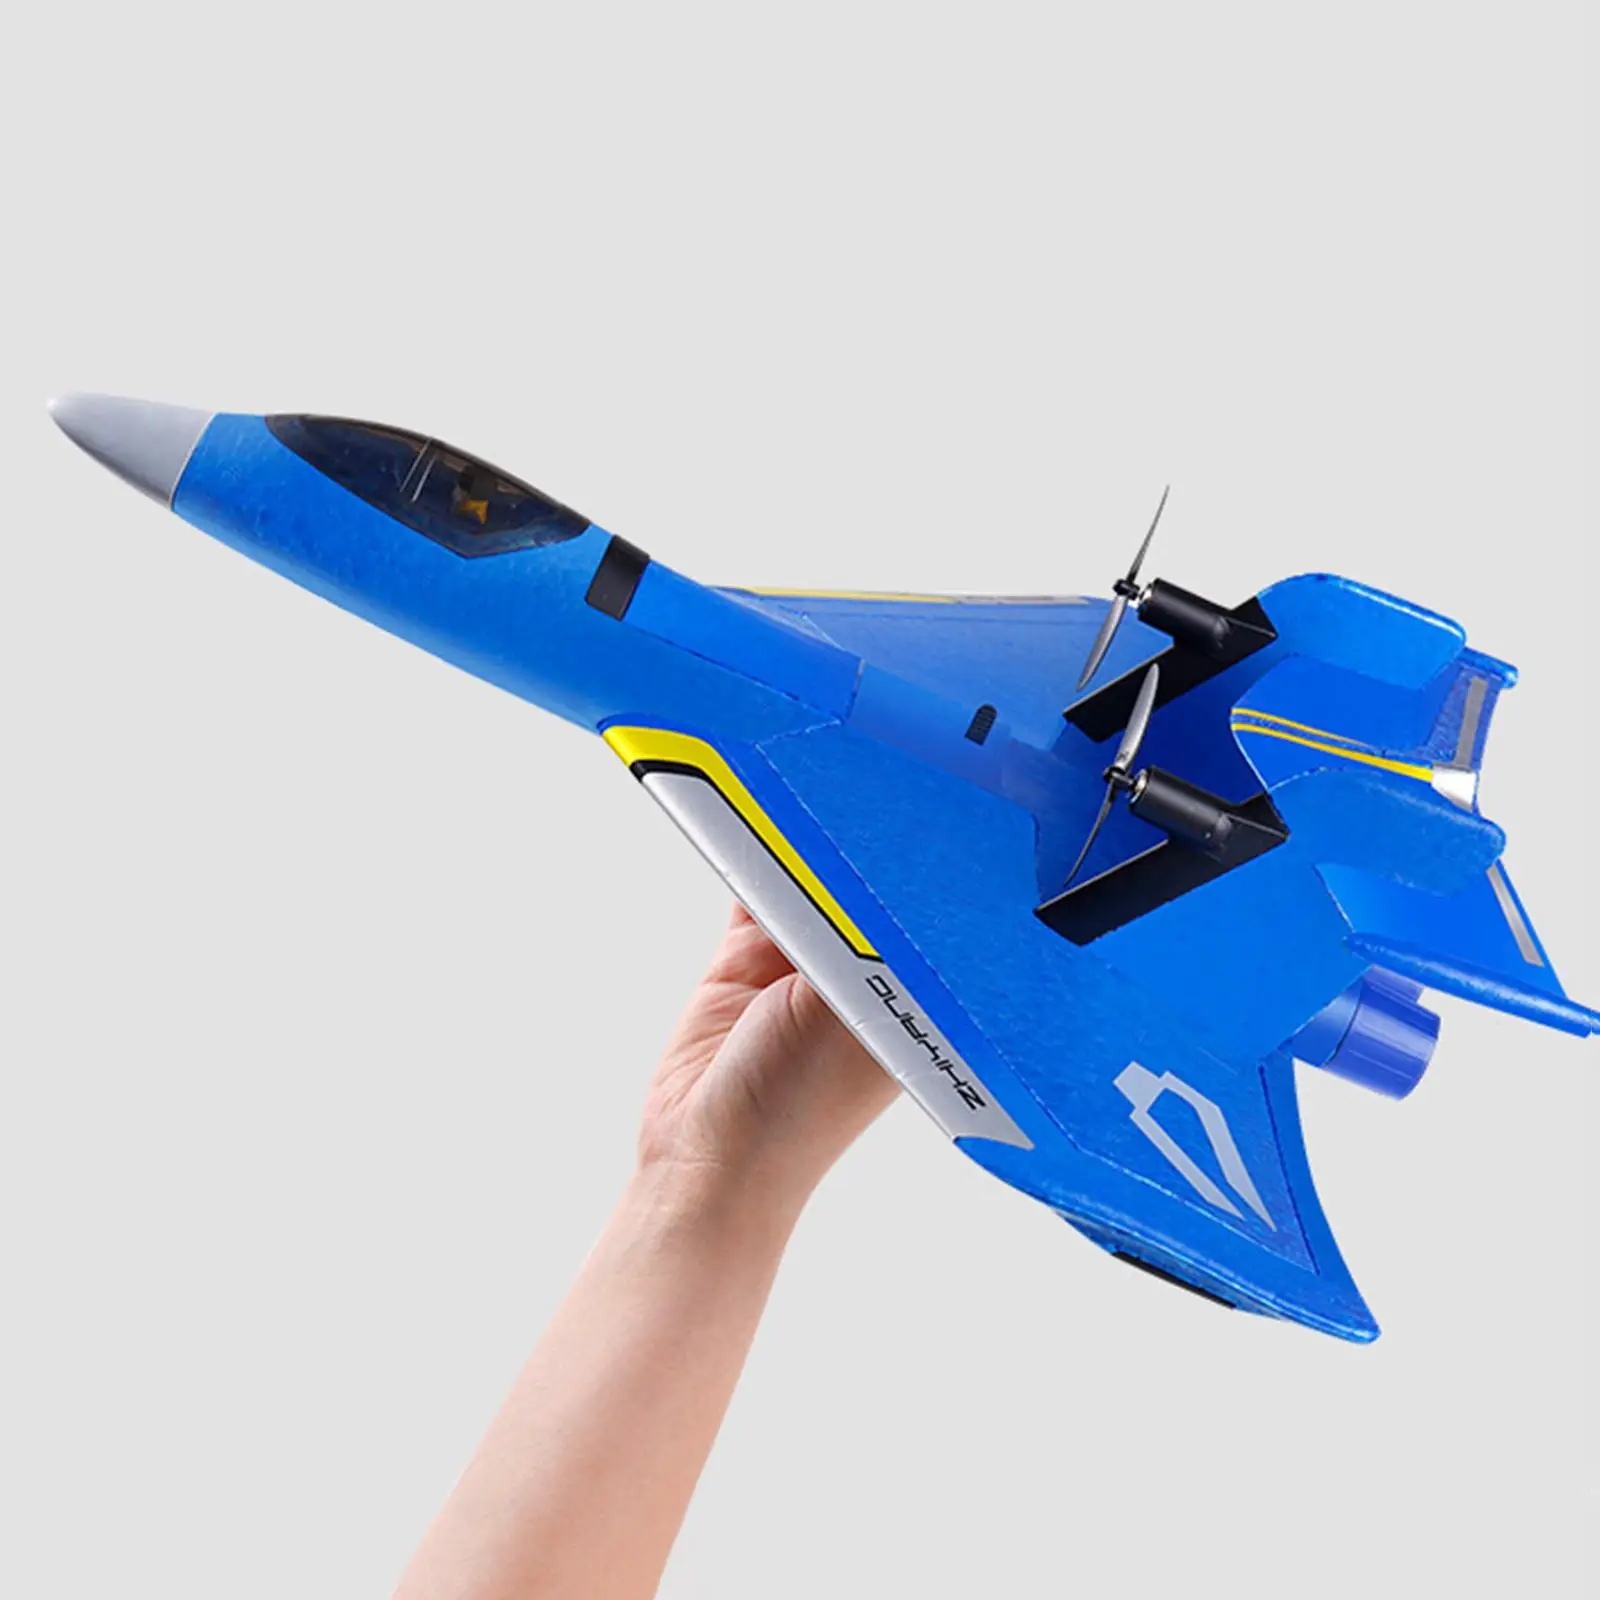 Hobby RC Airplane Lightweight Ready to Fly Plane Toy Fixed Wing RC Fighter for Girls Boys Beginner Holiday Present Adults Kids